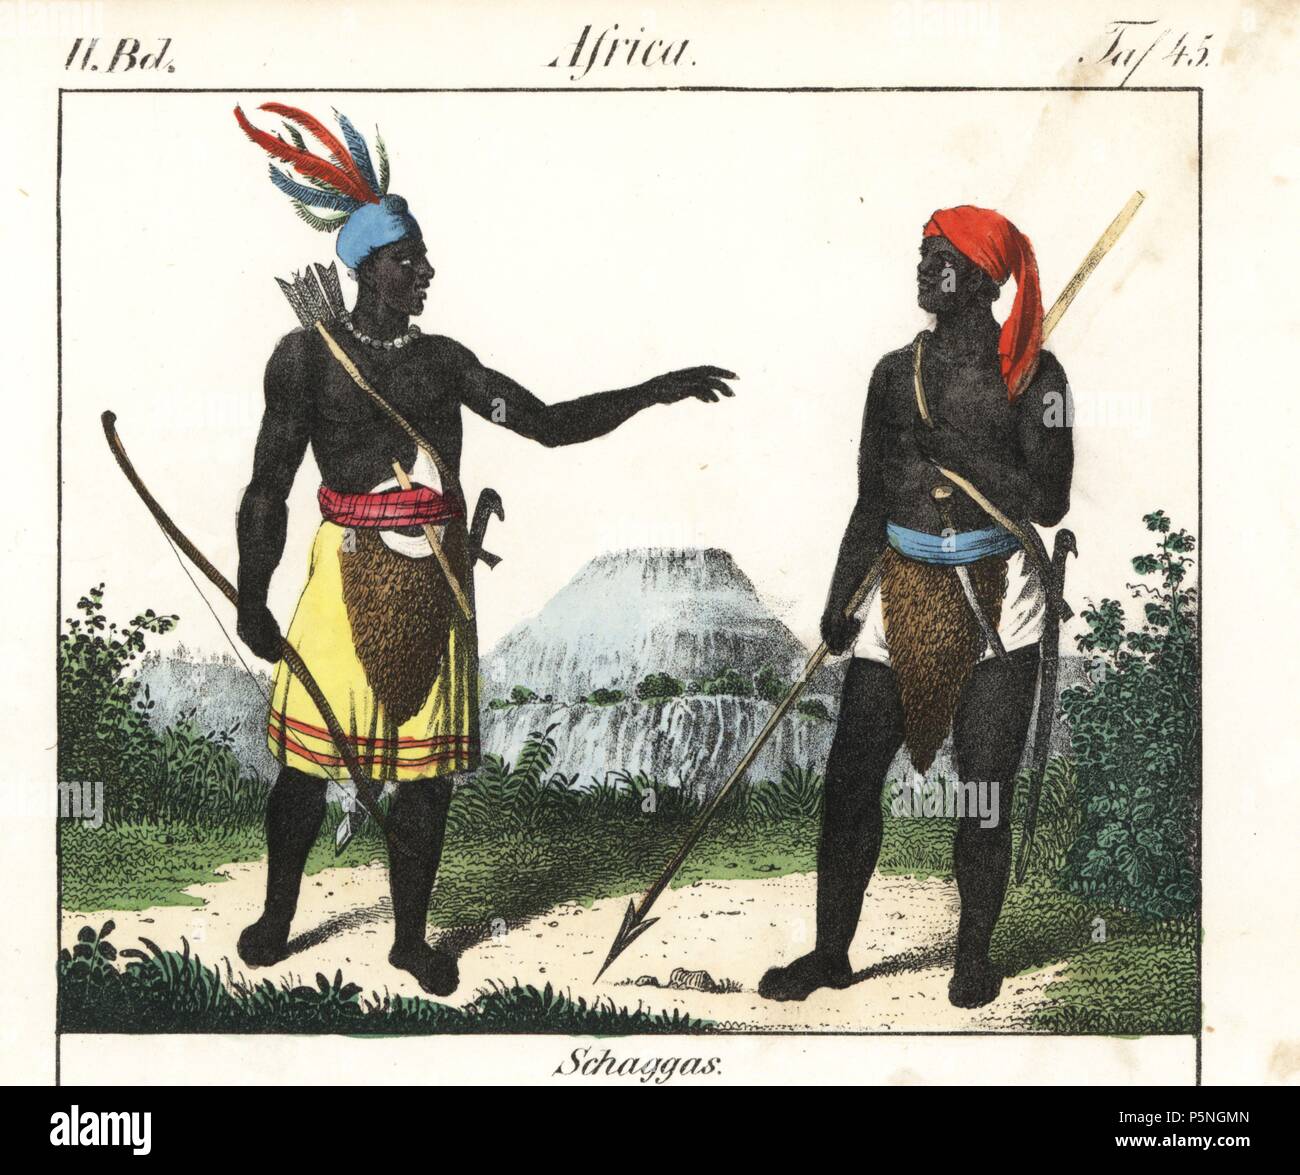 Chagga warriors of Tanzania with bow and arrow, spear and curved swords, wearing feather cap, skirt and animal skin loincloths. Handcoloured lithograph from Friedrich Wilhelm Goedsche's 'Vollstaendige Völkergallerie in getreuen Abbildungen' (Complete Gallery of Peoples in True Pictures), Meissen, circa 1835-1840. Goedsche (1785-1863) was a German writer, bookseller and publisher in Meissen. Many of the illustrations were adapted from Bertuch's 'Bilderbuch fur Kinder' and others. Stock Photo